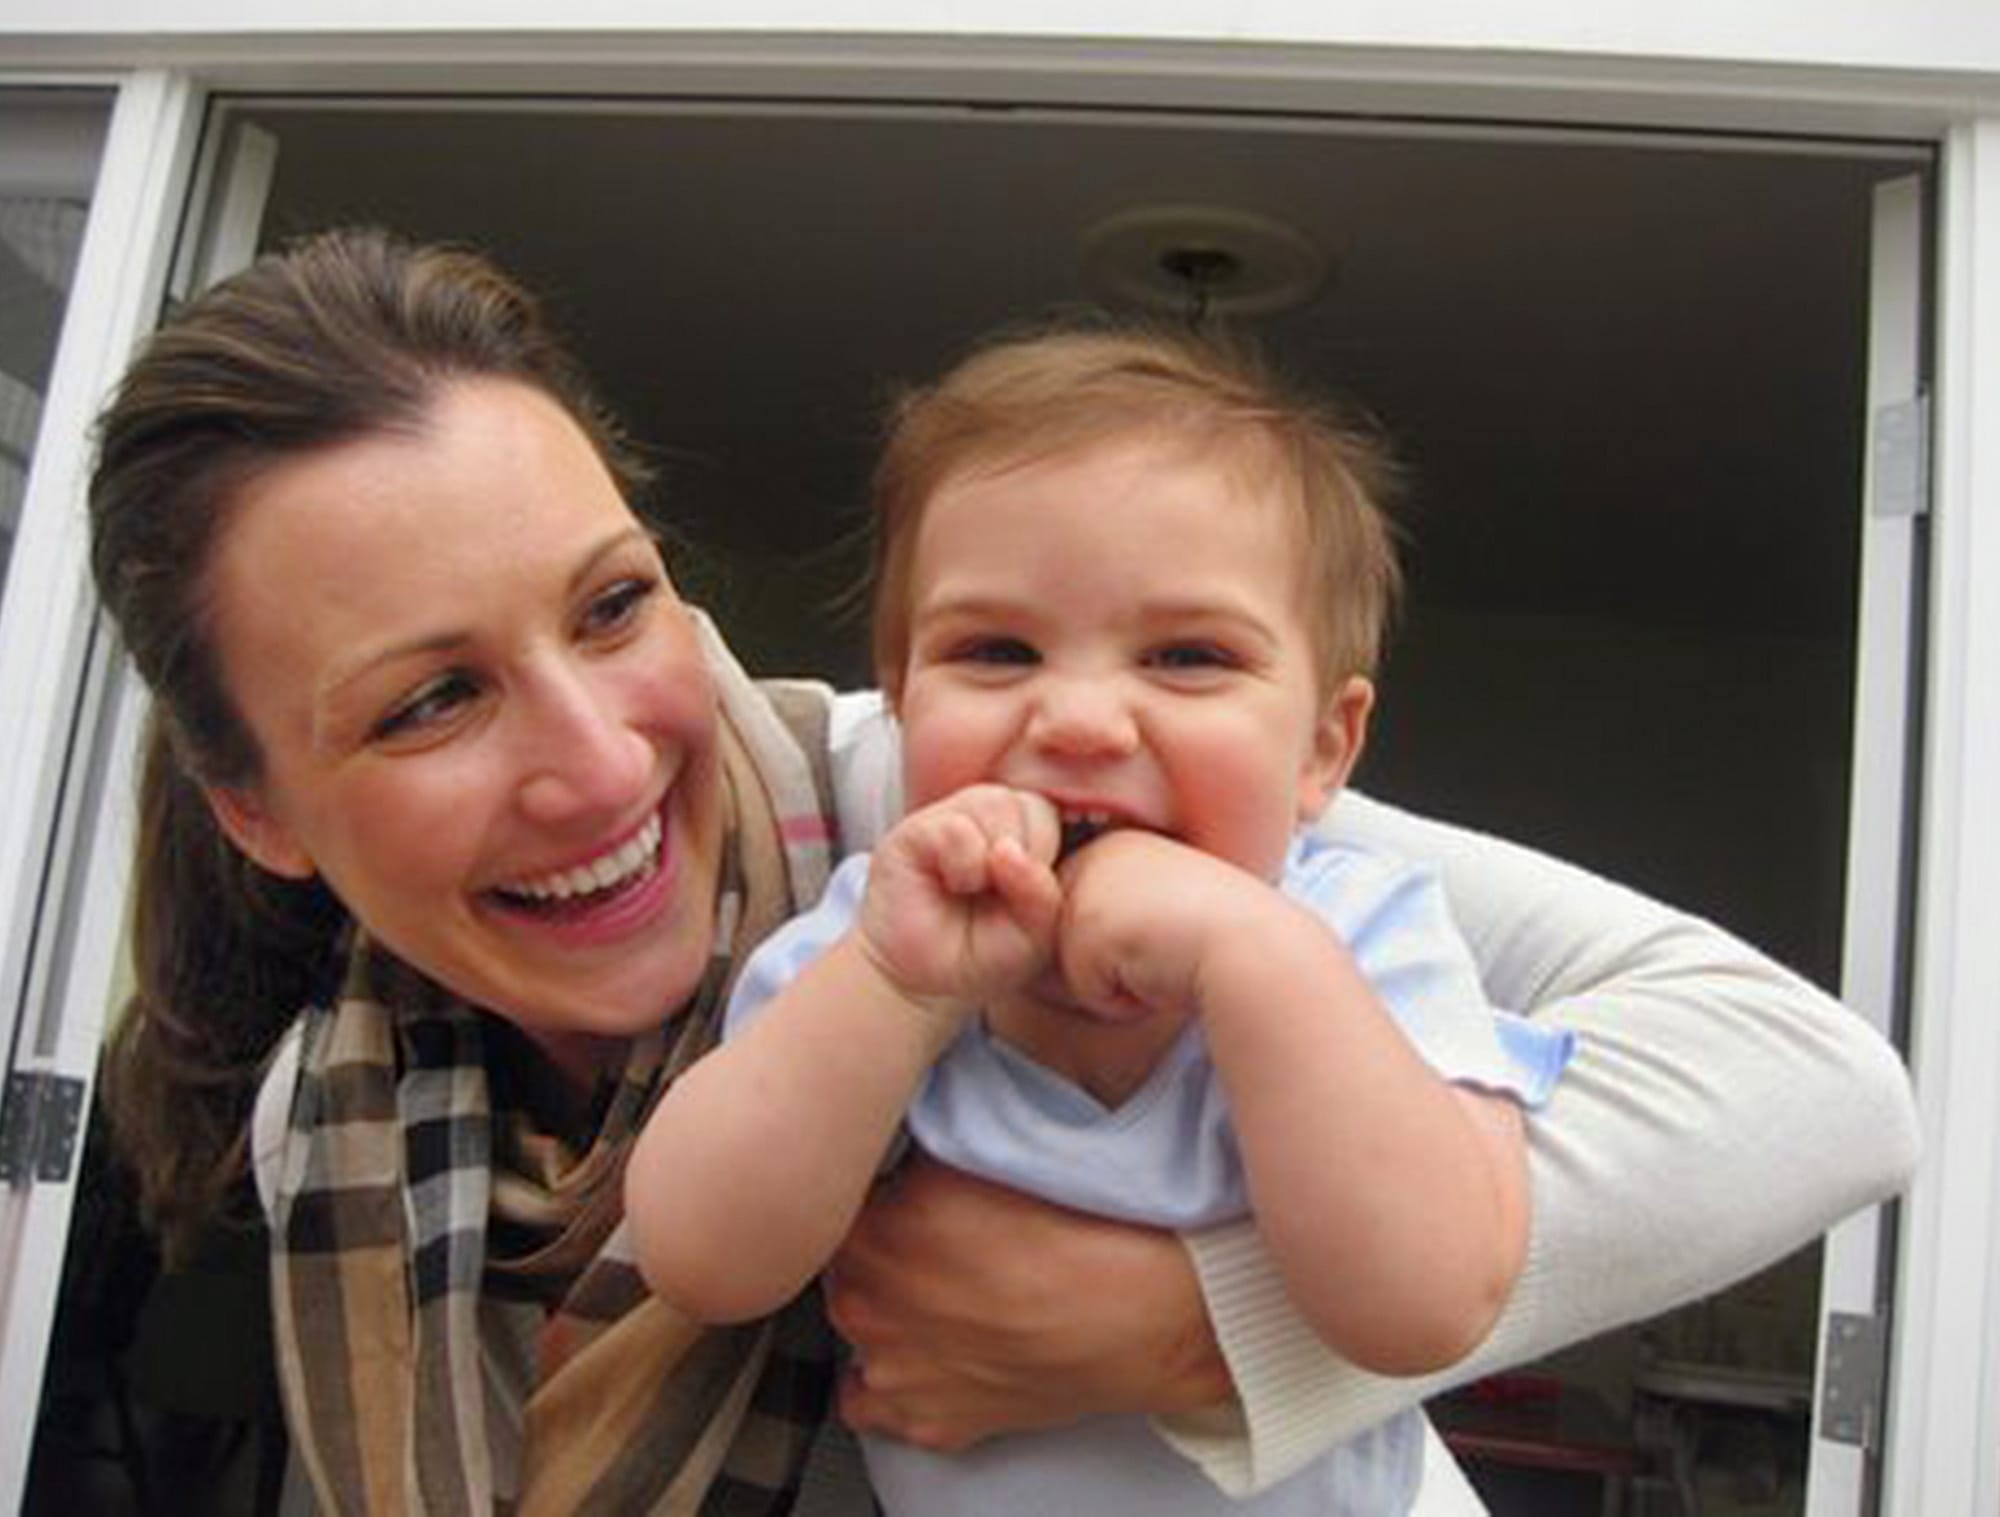 Stacey Armato of Hermosa Beach, Calif., with her son, Lorenzo, in 2010.